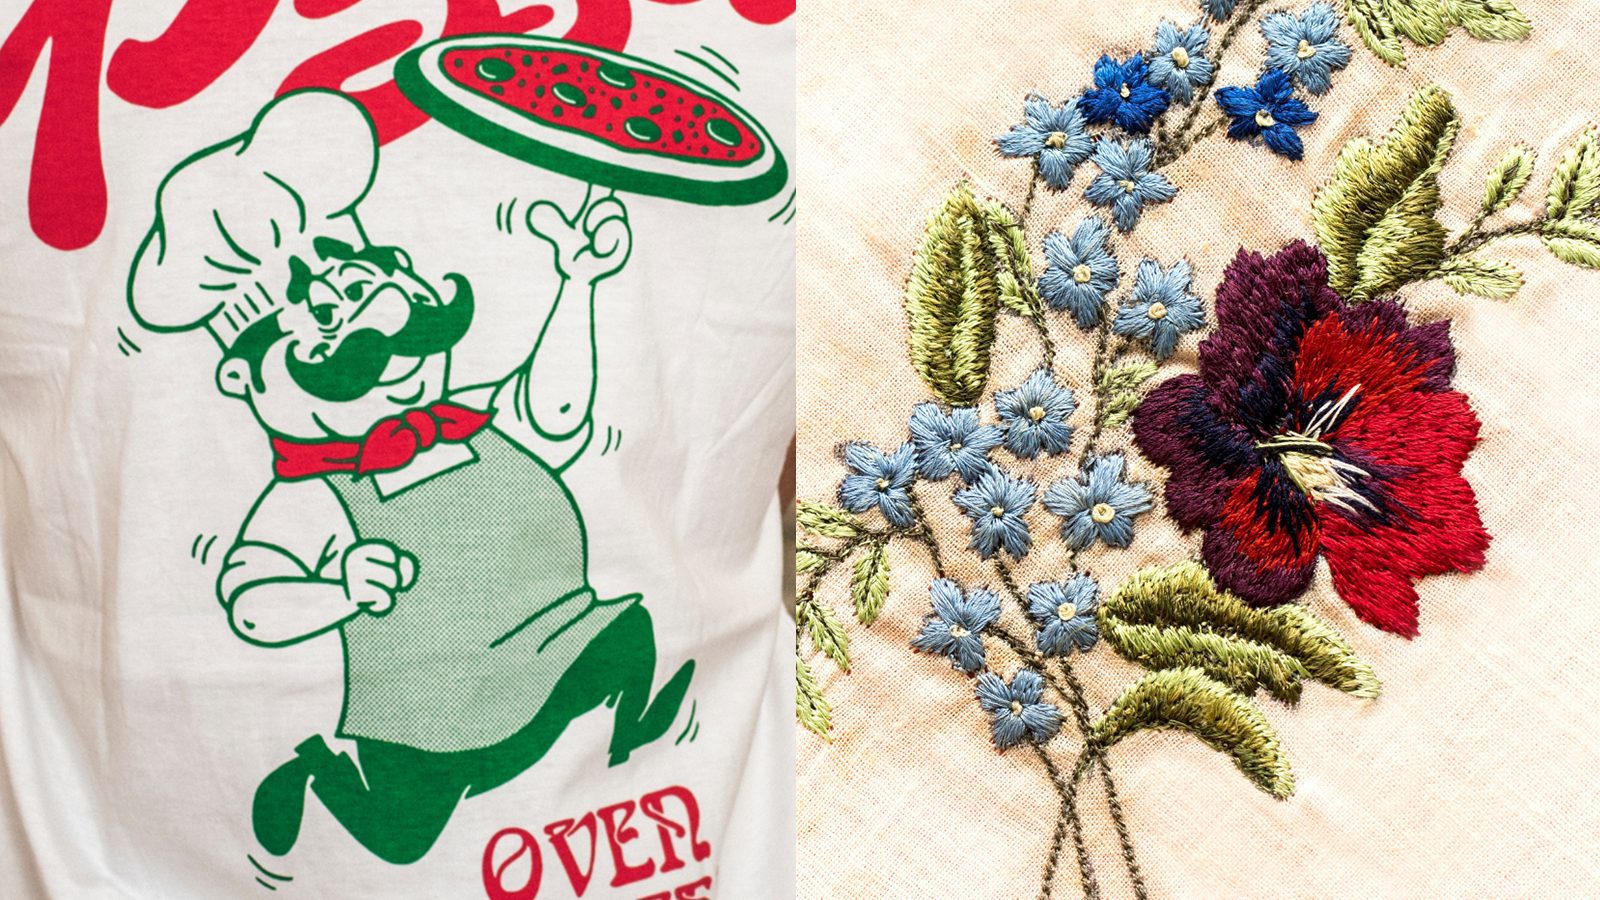 Screen Printing vs Embroidery: What is the Difference?